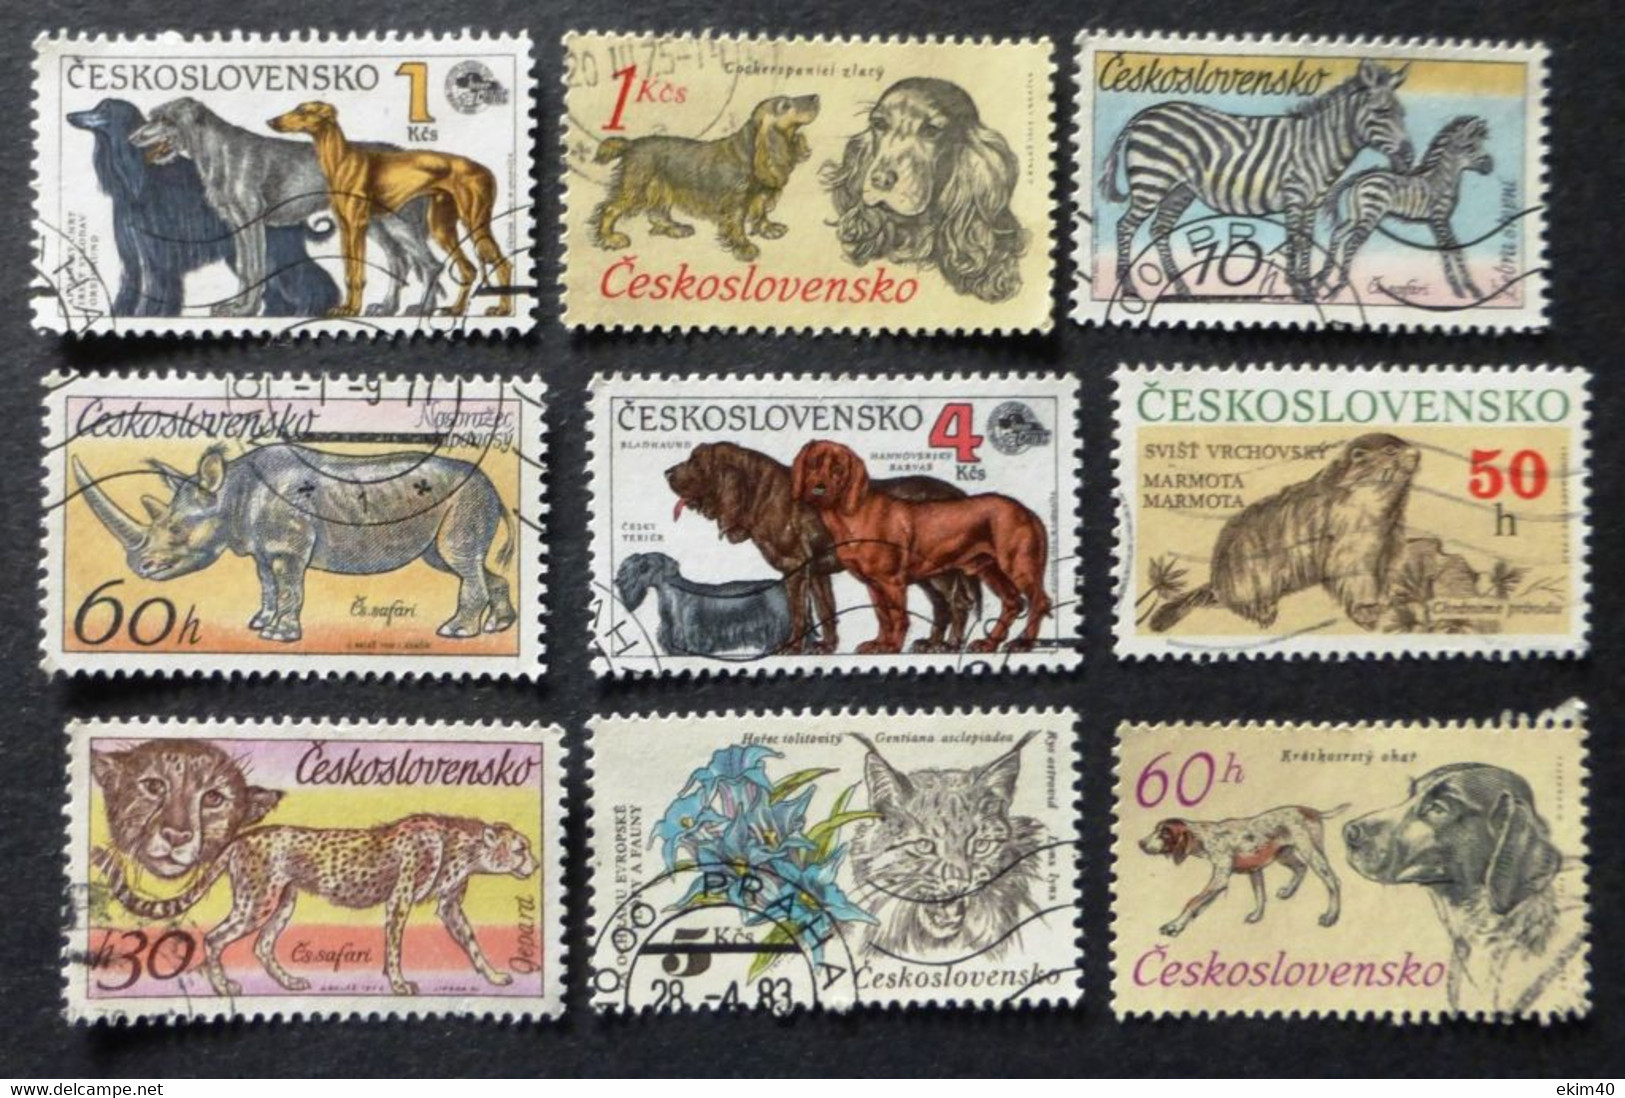 Selection Of Used/Cancelled Stamps From Czechoslovakia Wild & Domestic Animals. No DC-320 - Used Stamps